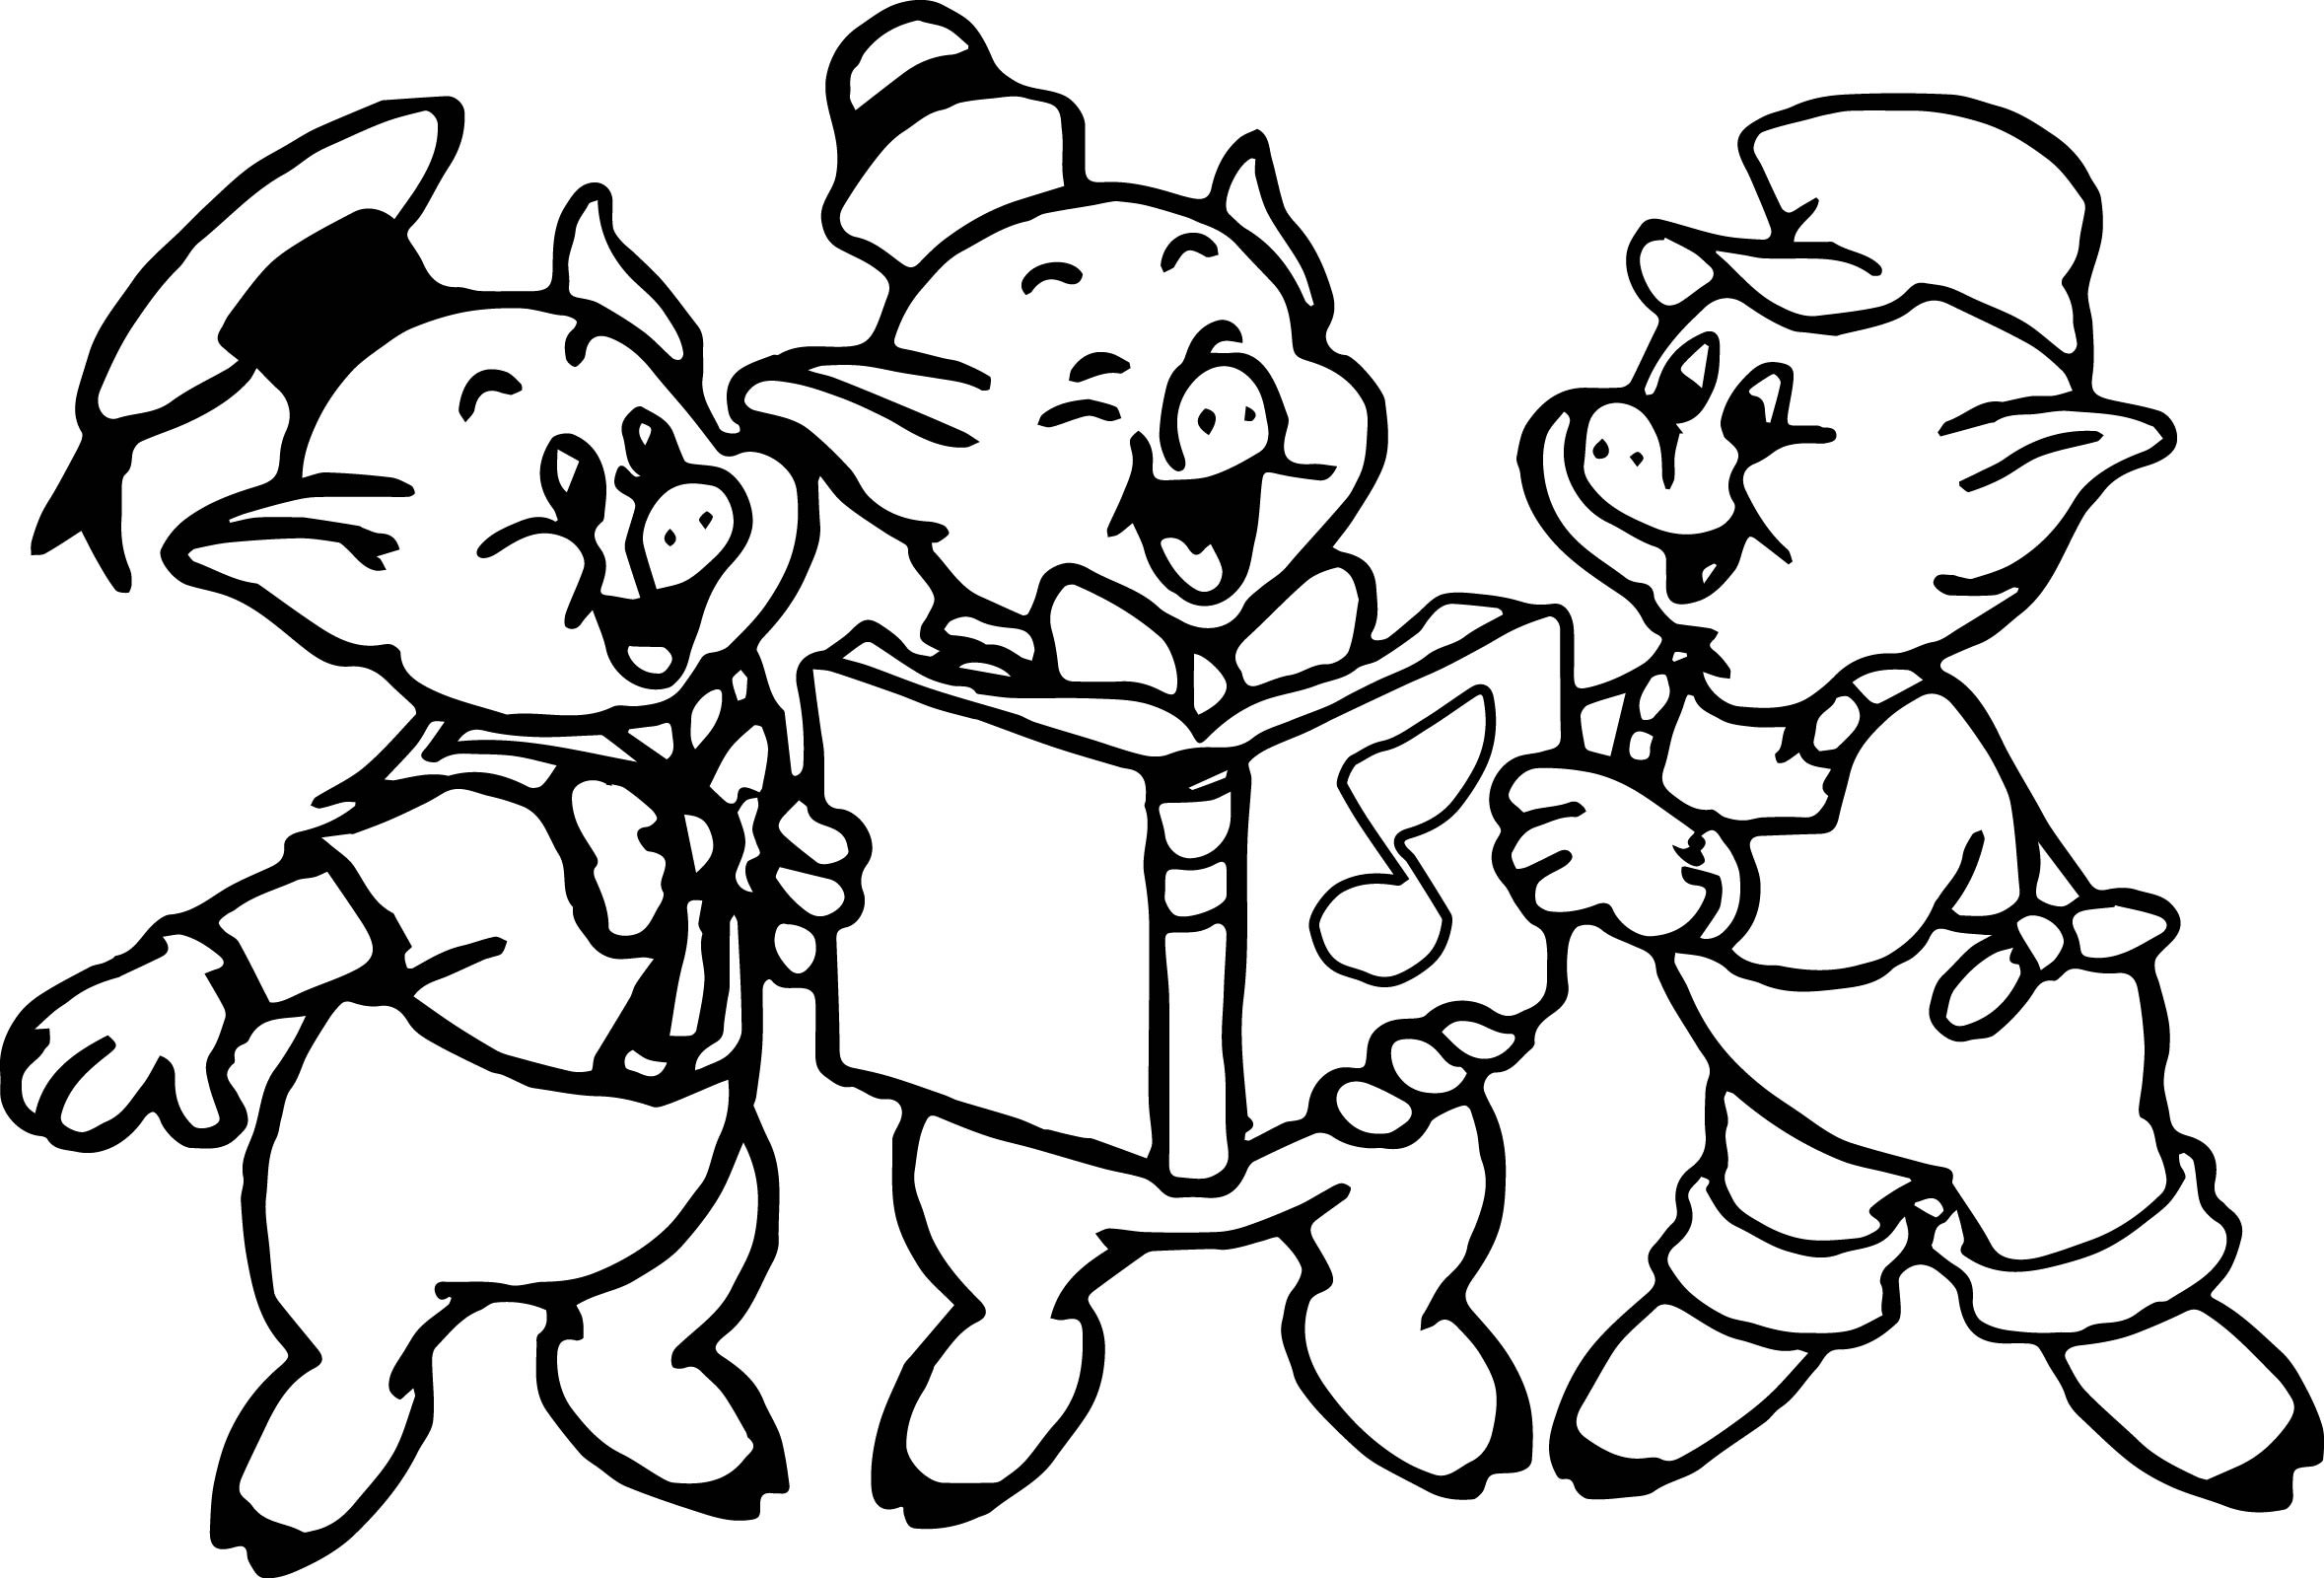 Printable Coloring Pictures Of The Three Little Pigs Coloring Pages